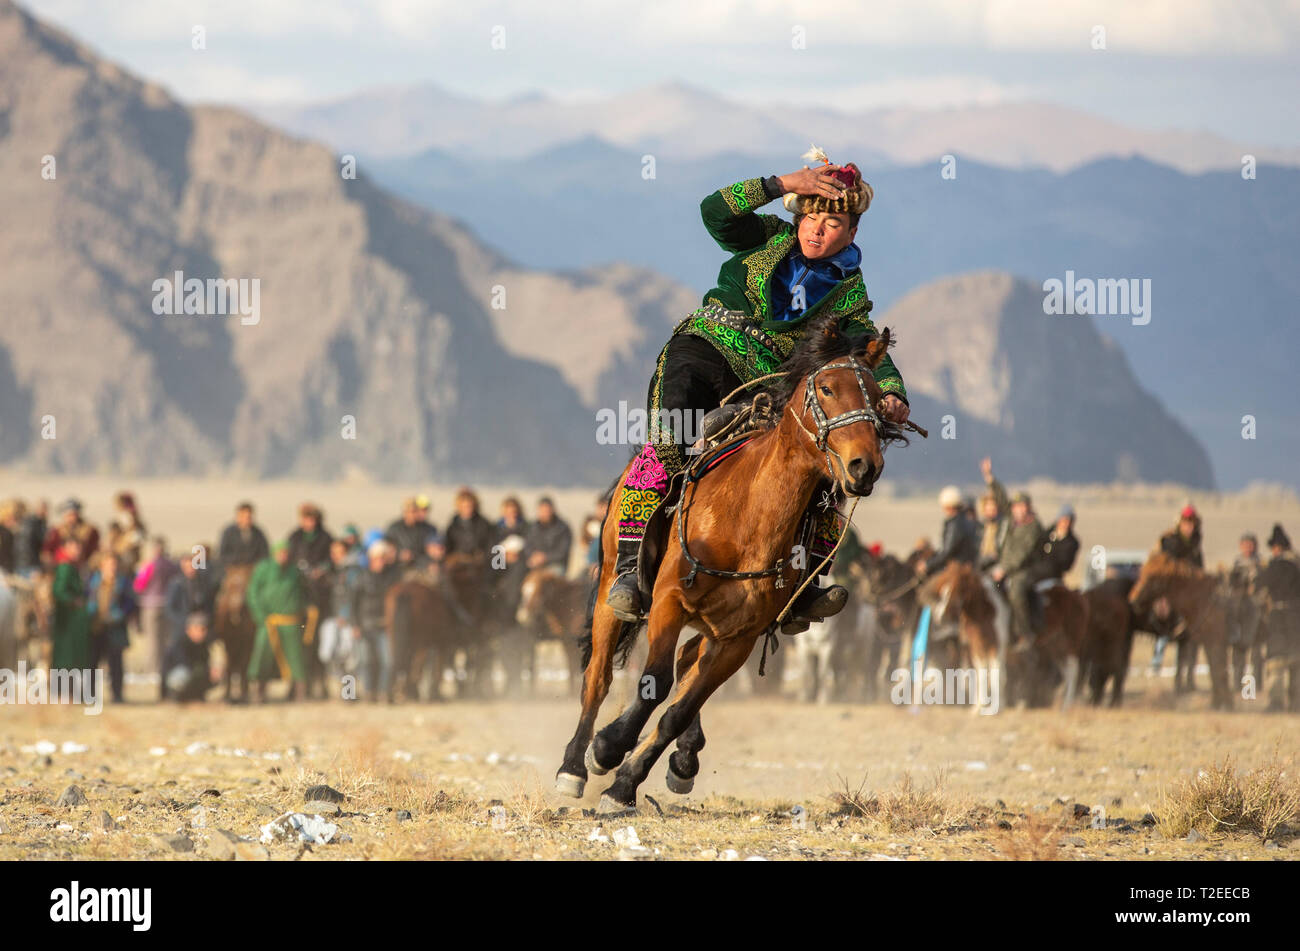 bayan Ulgii, Mongolia, 3rd October 2015: kazakh men on their horses in a landscape of western mongolia Stock Photo